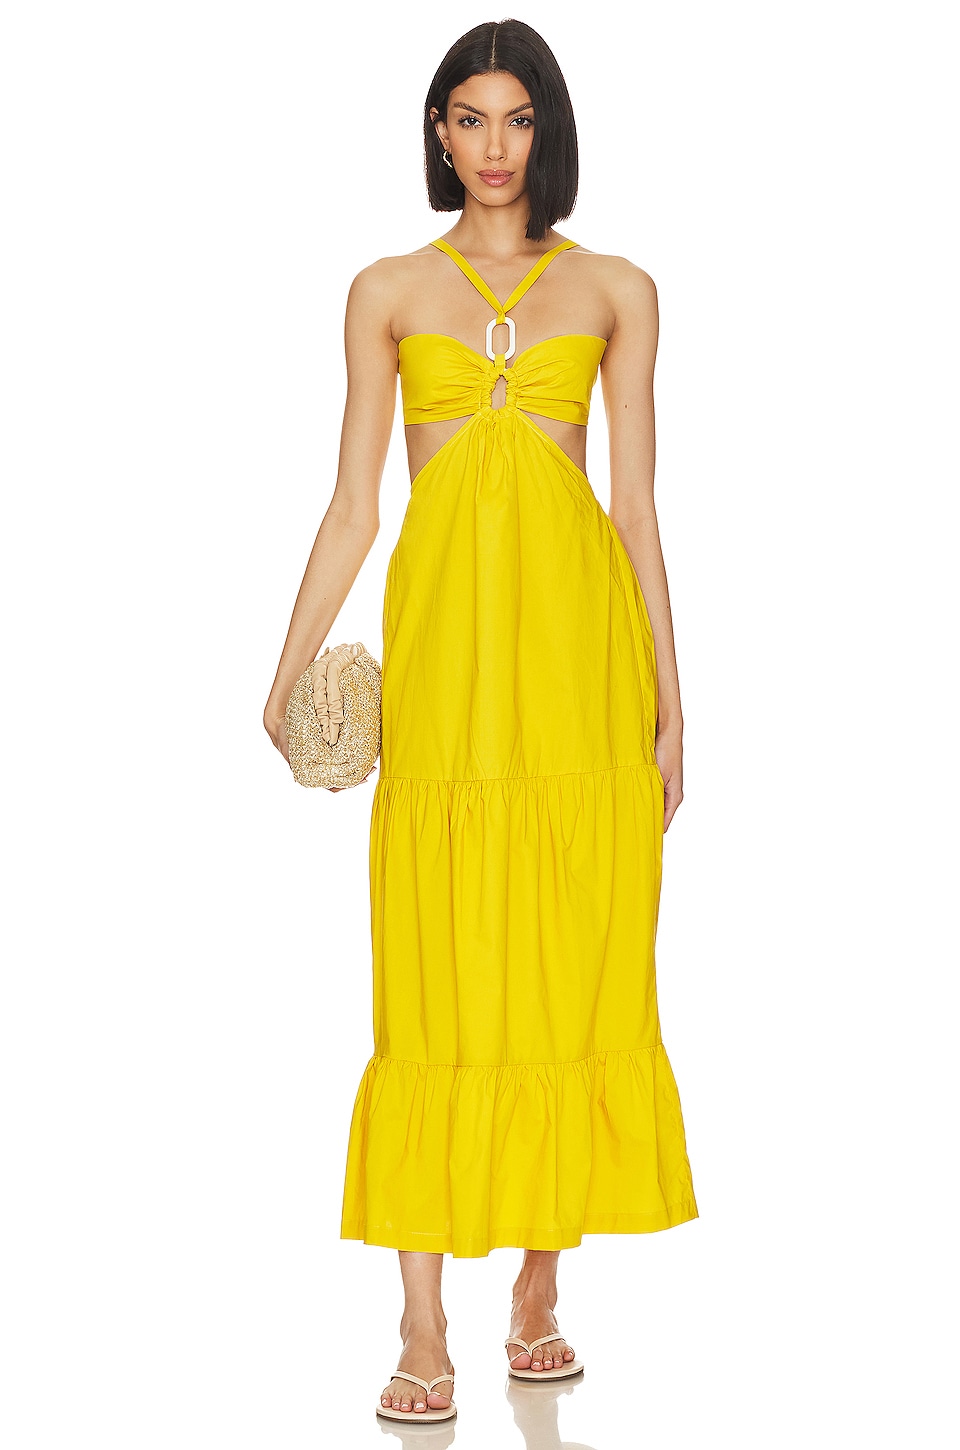 Lovers and Friends x Jetset Christina Easy Breezy Maxi Dress in Yellow